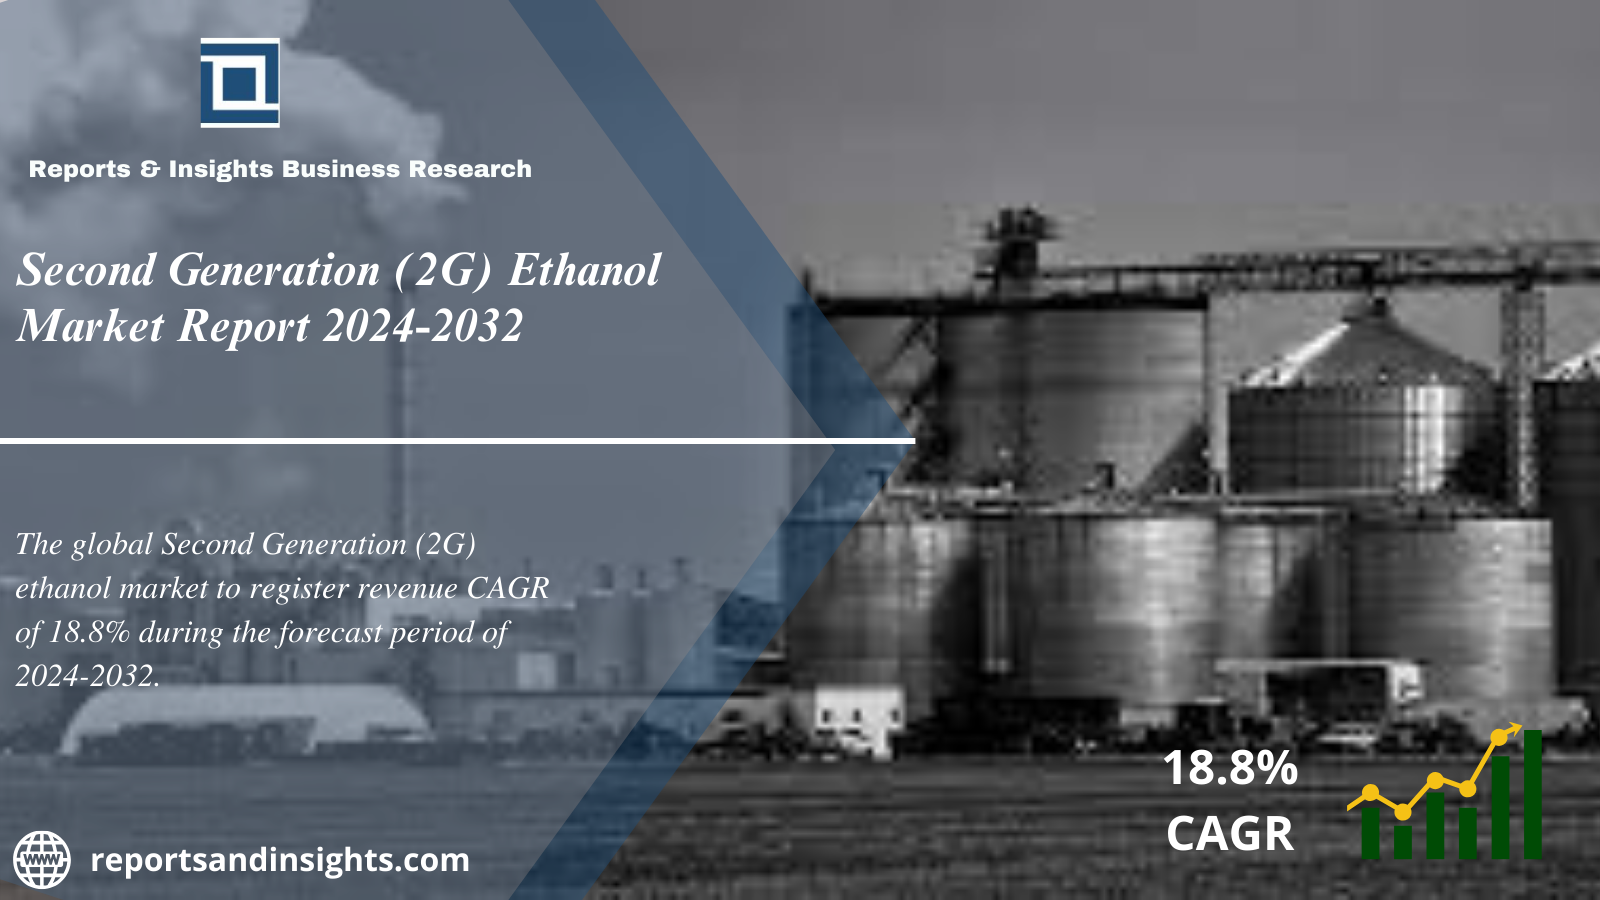 Second Generation (2G) Ethanol Market 2024 to 2032: Size, Growth, Share, Trends and Report Analysis